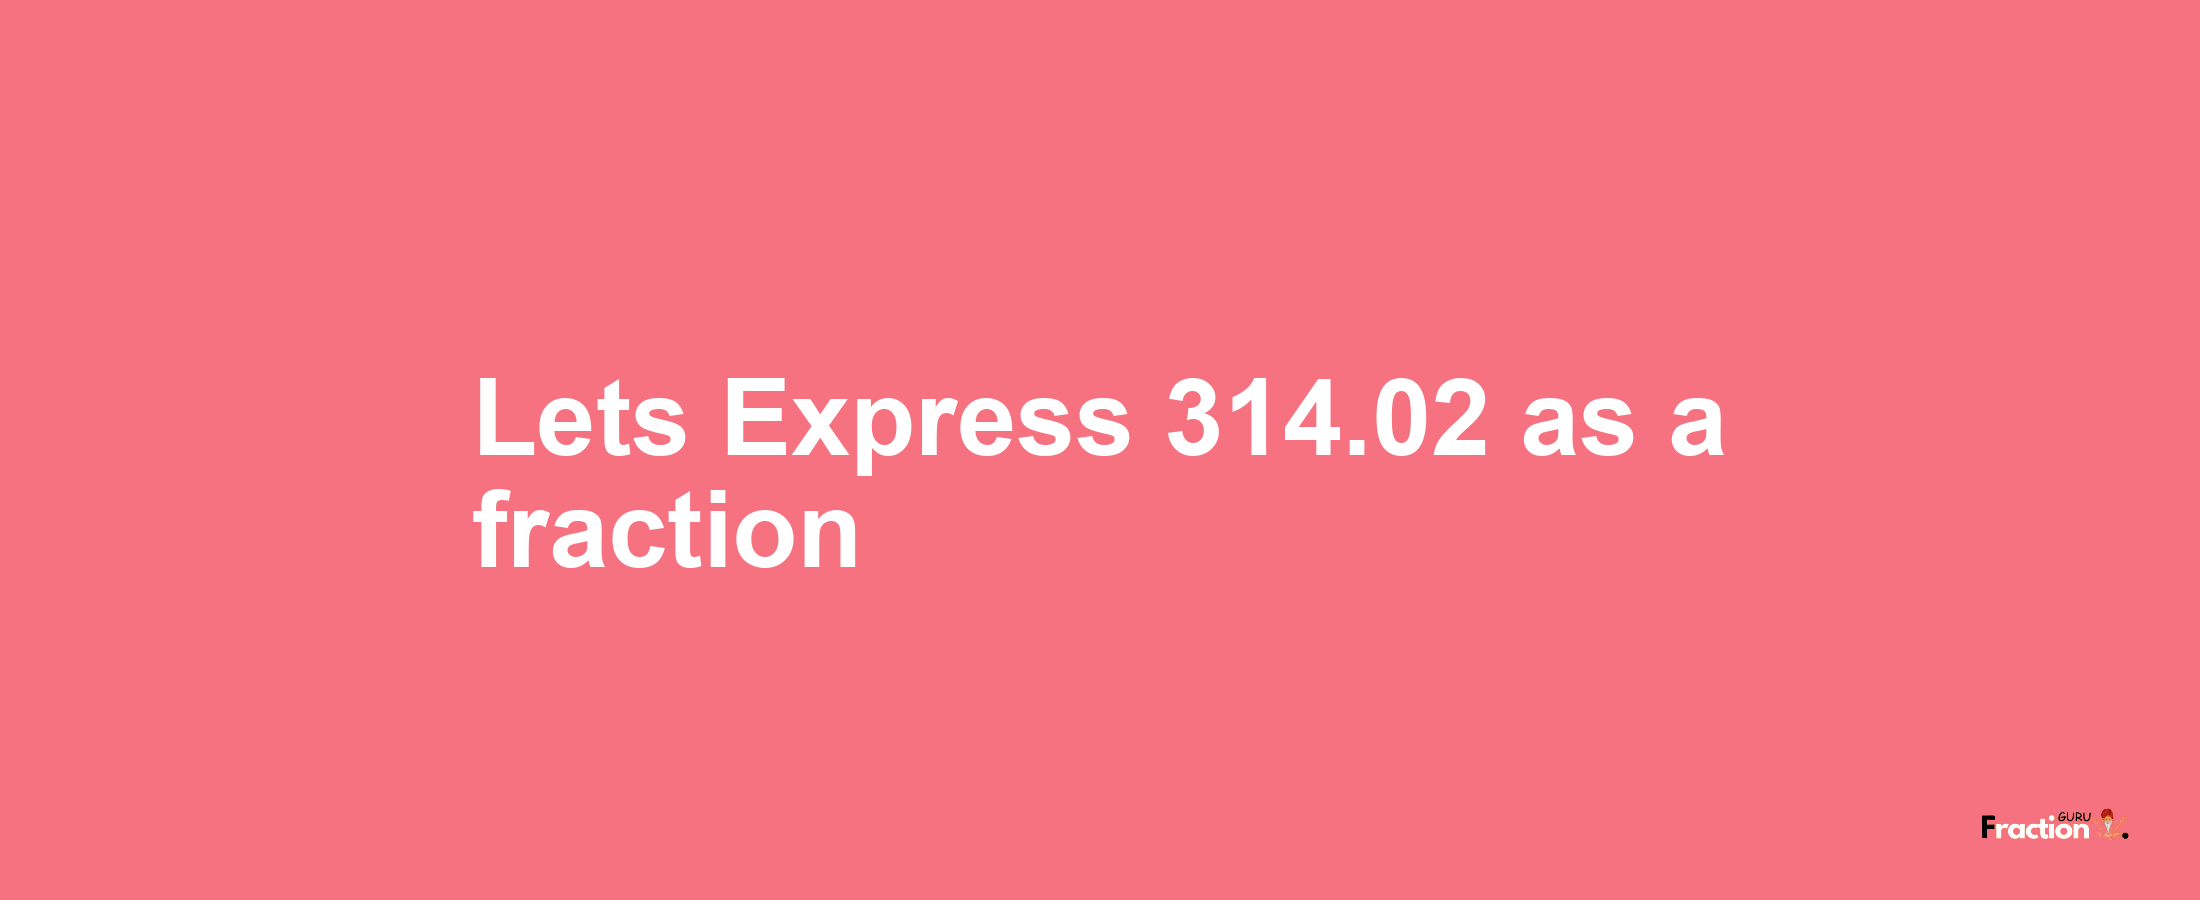 Lets Express 314.02 as afraction